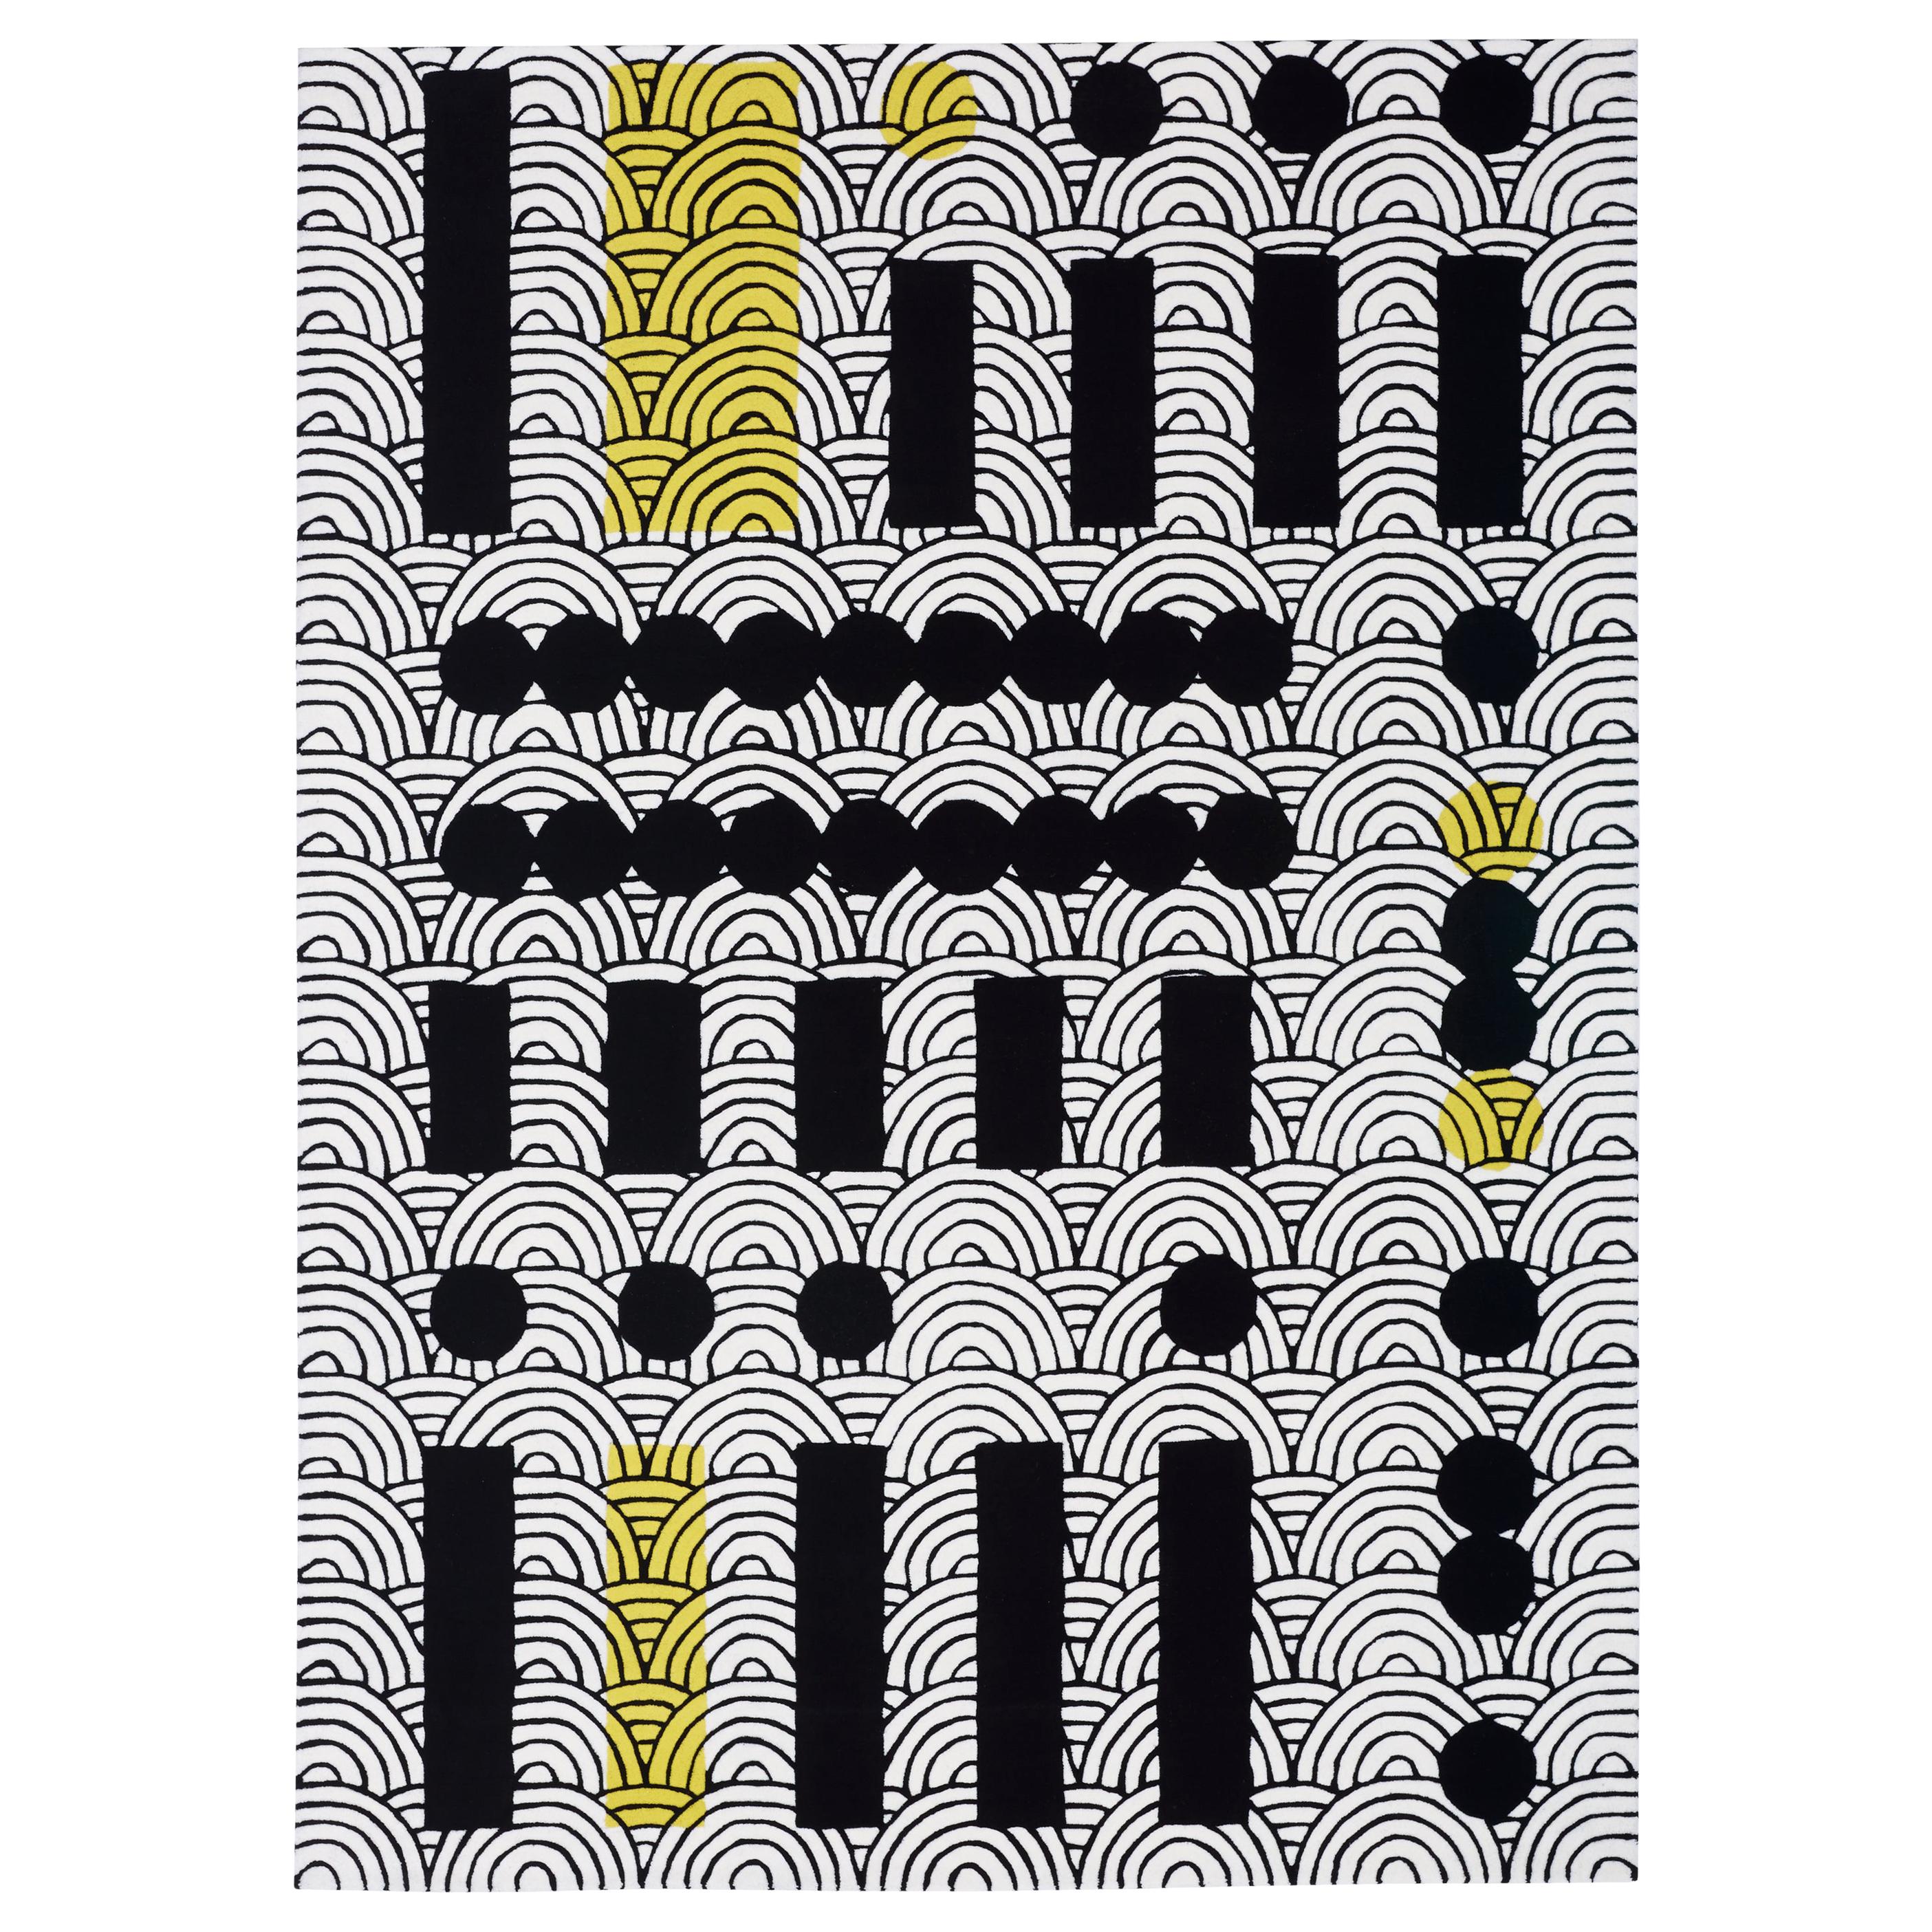 Abstract Dadaist Contemporary Rug inspired by Sophie Taeuber Arp